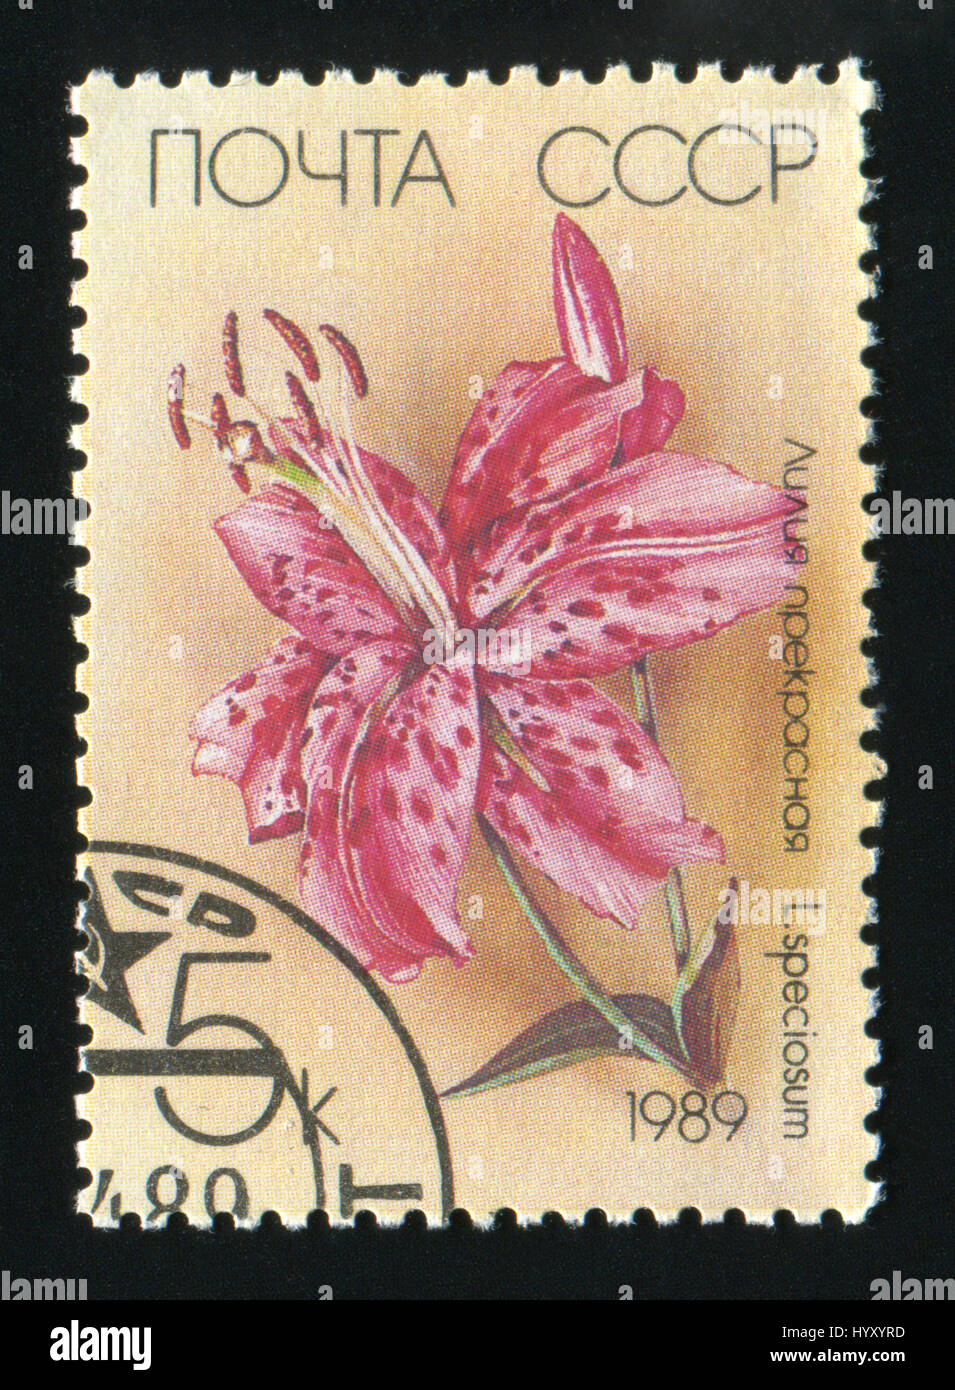 USSR - CIRCA 1989: A post stamp printed in the USSR shows a Japanese Lily, Lilium speciosum, circa 1989. Stock Photo